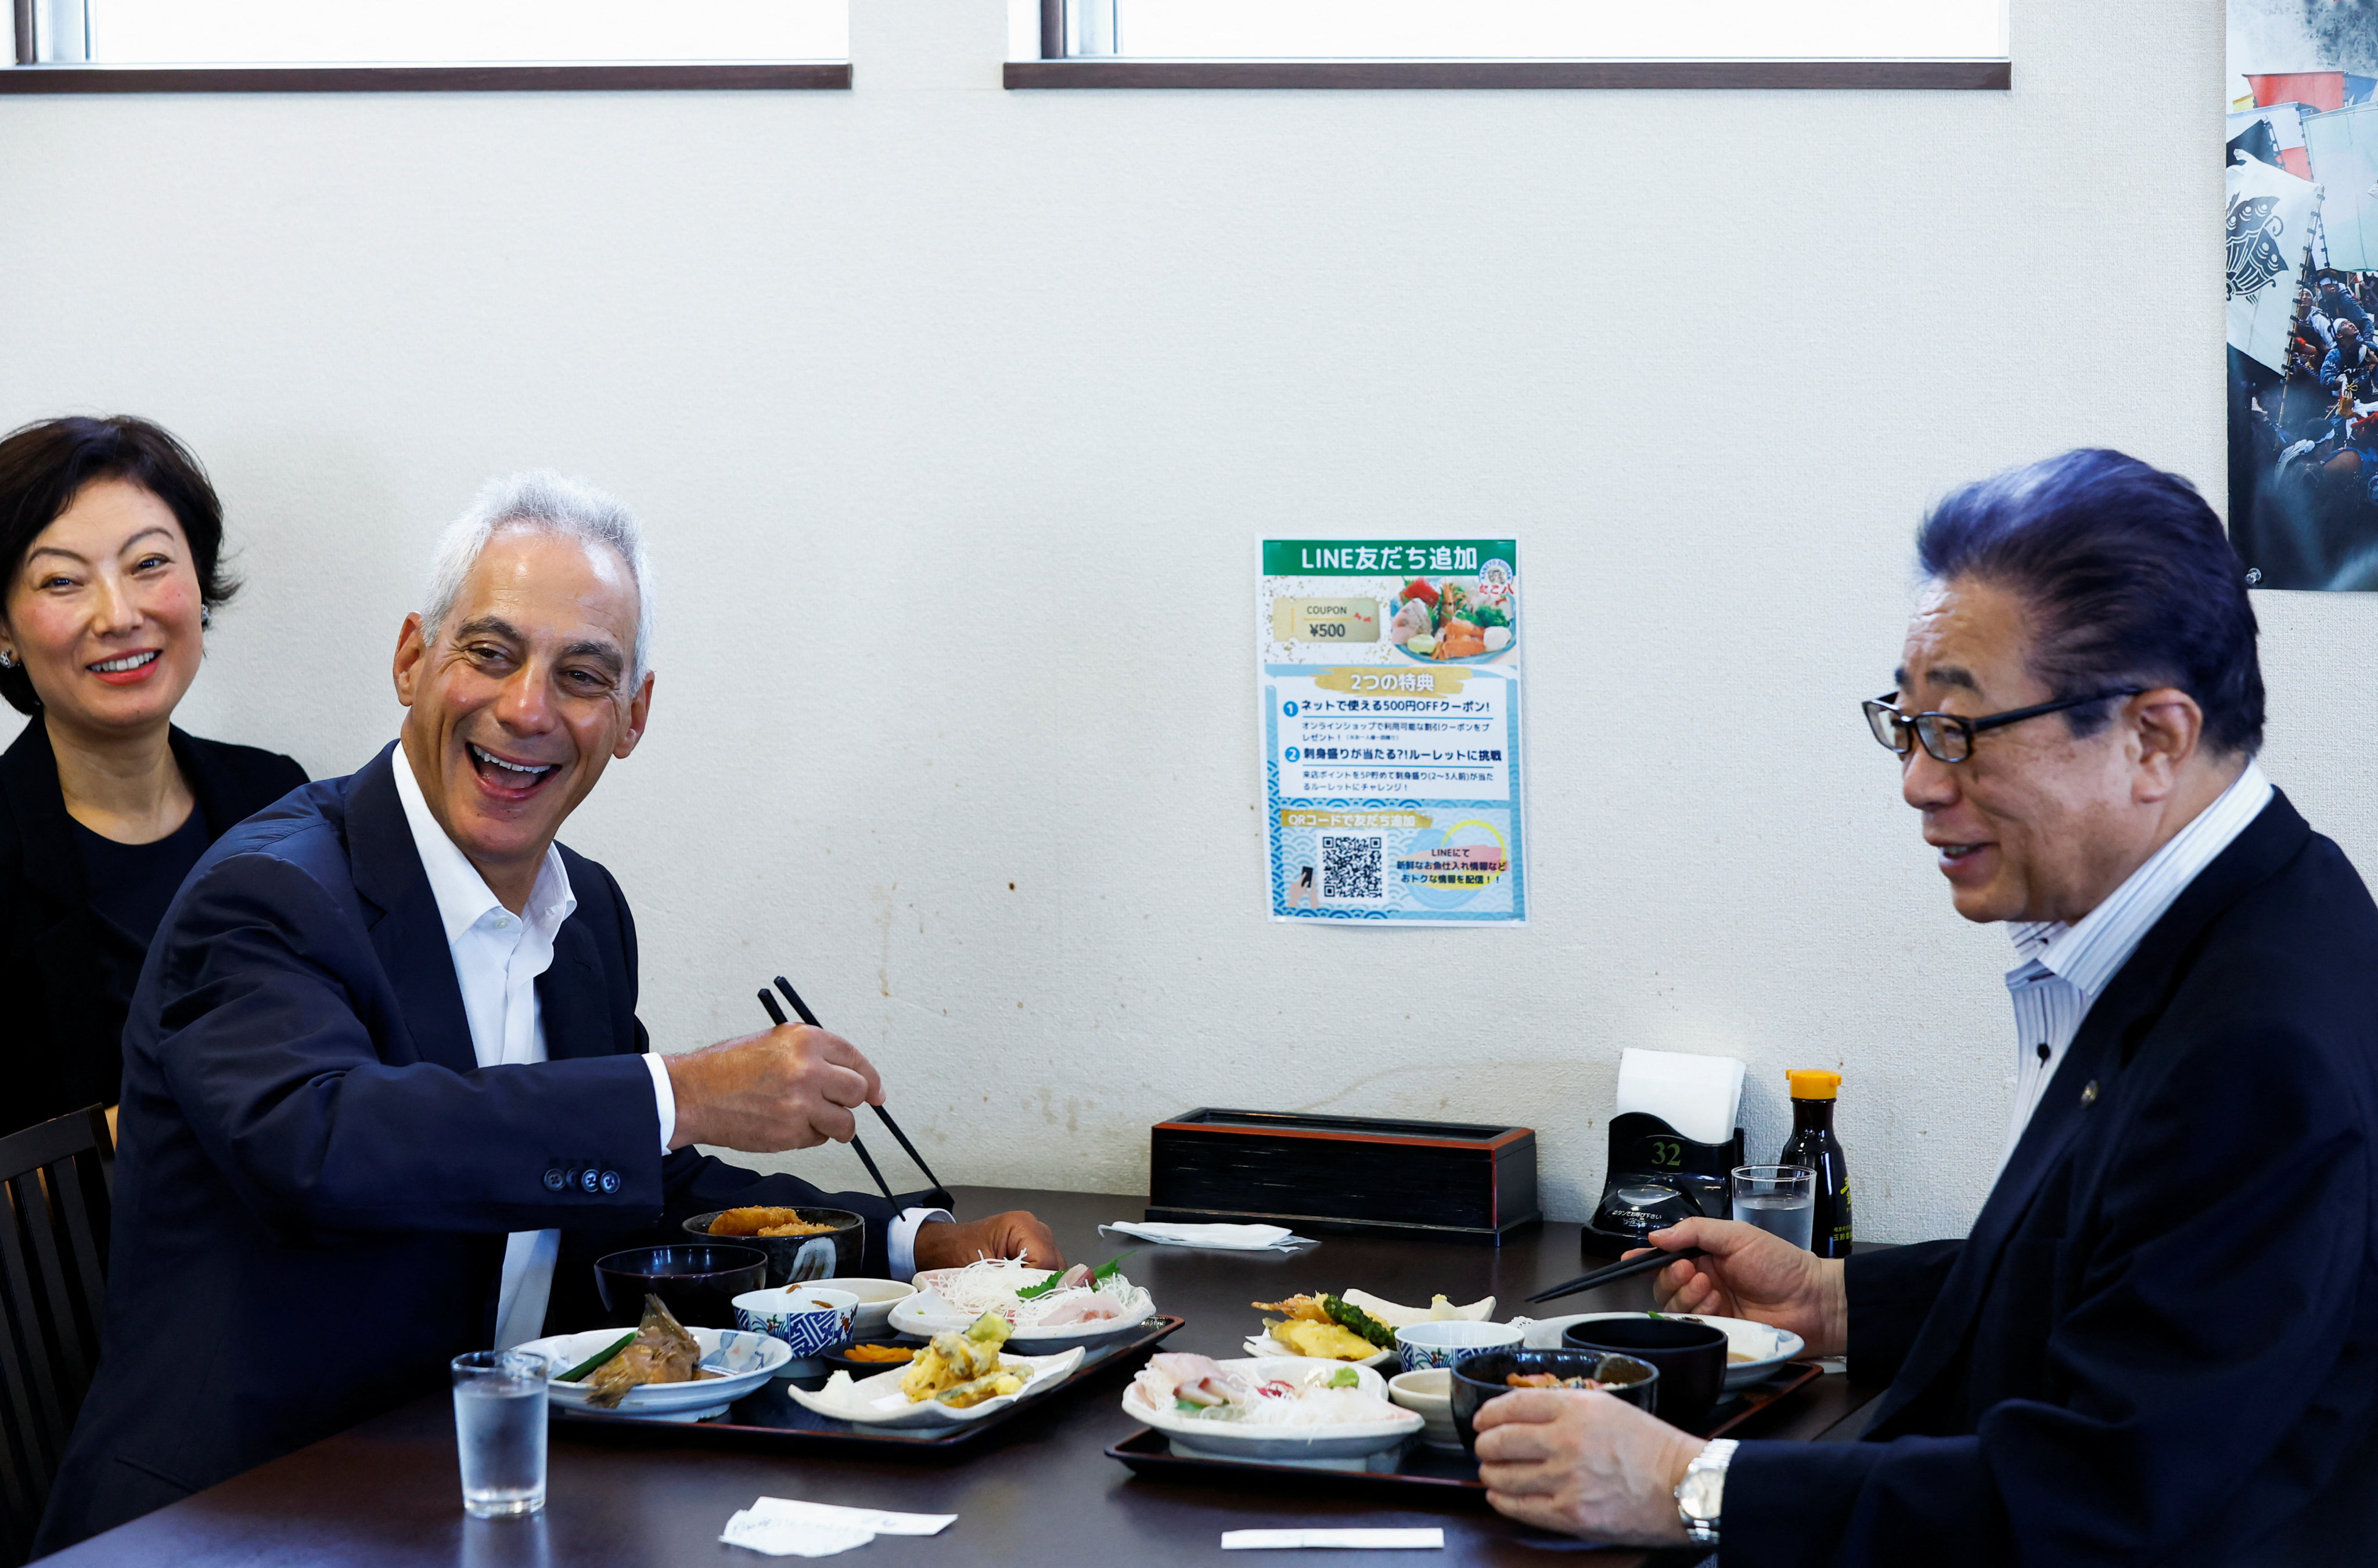 US Ambassador to Japan Rahm Emanuel eats lunch with Soma Mayor Hidekiyo Tachiya to show his support for the water discharge from the Fukushima nuclear power plant. Photo: Reuters